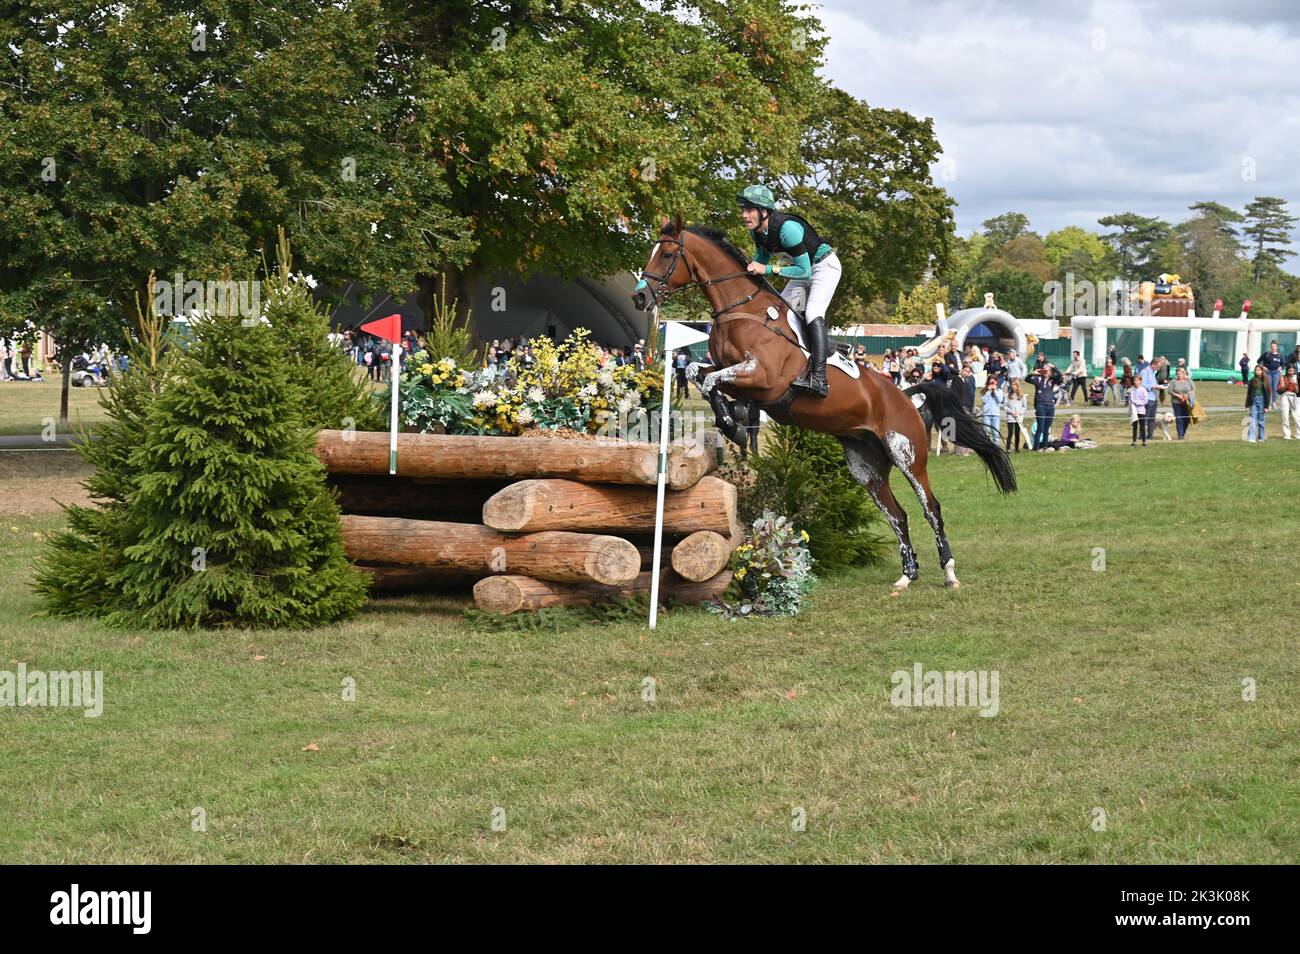 Max Warburton on Cooley Fireball, cross country phase of the CCI4*-S compettion, Blenheim Palace International Horse Trials, Blenheim Palace, Woodstoc Stock Photo